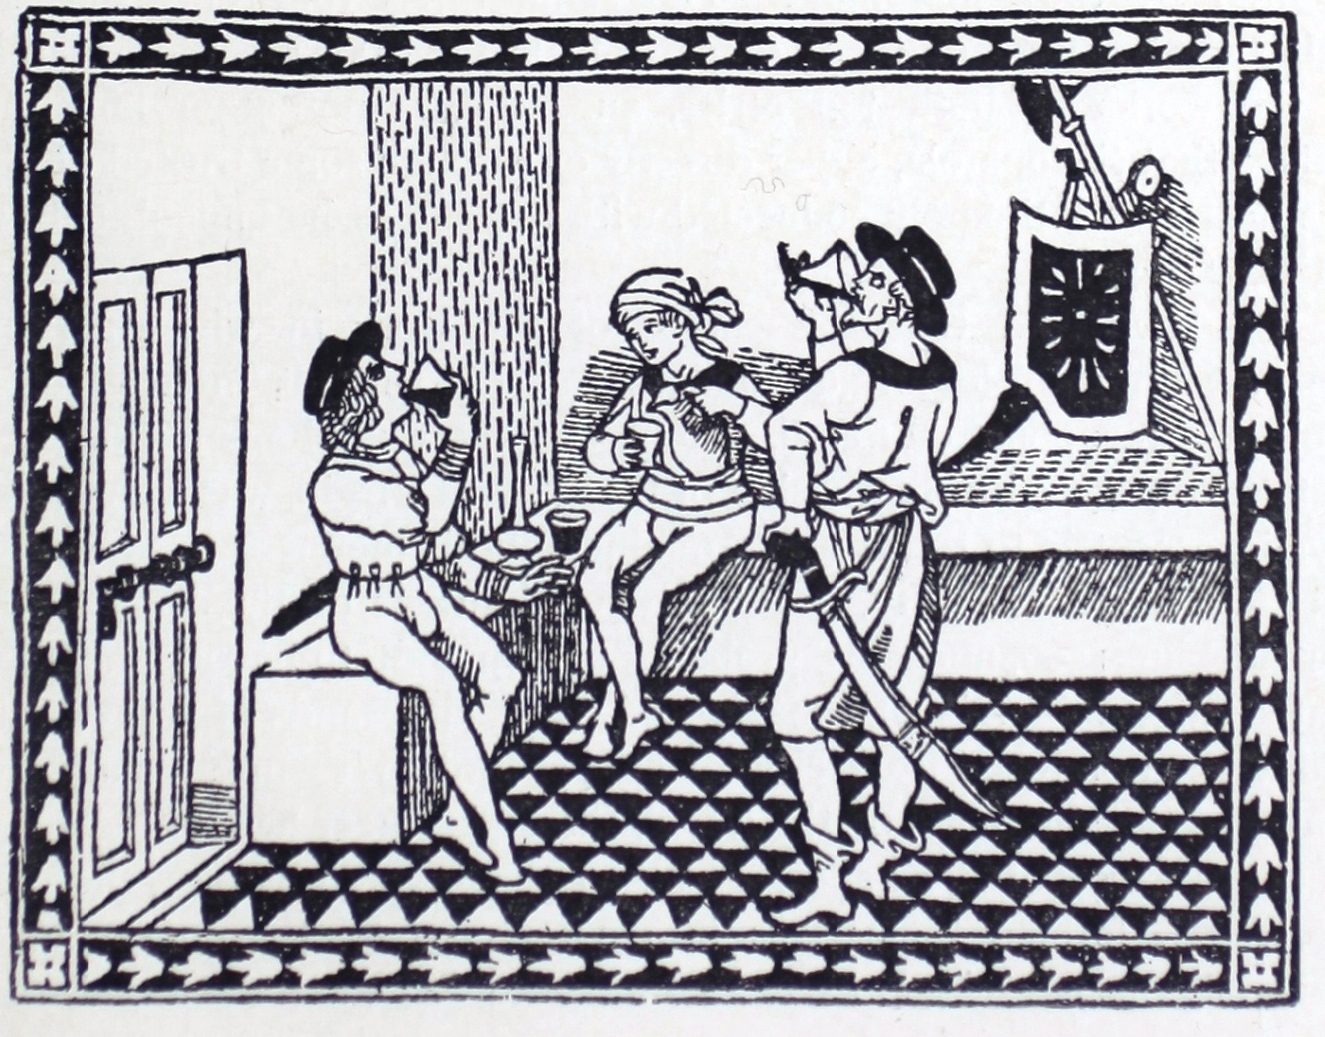 Wood engraved image shows three men seated in a room together drinking a dark beverage. 